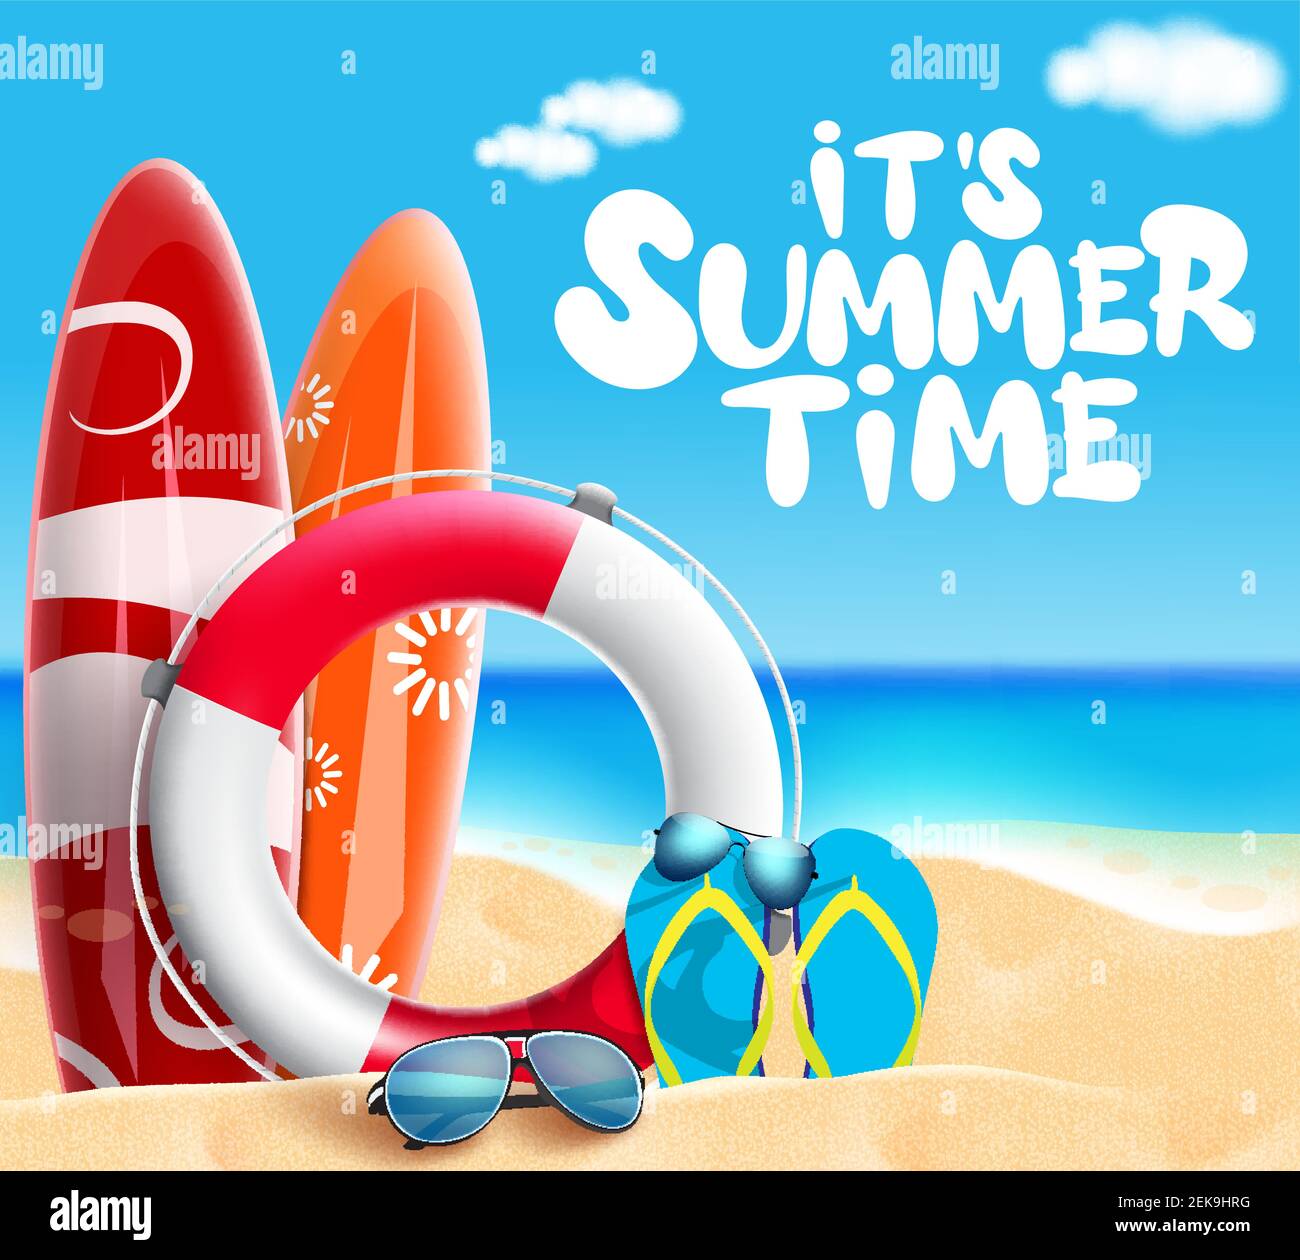 Summer time vector banner design. It's summer time text with beach element like surfboard, lifebuoy and sunglasses in sea and sand background for fun. Stock Vector